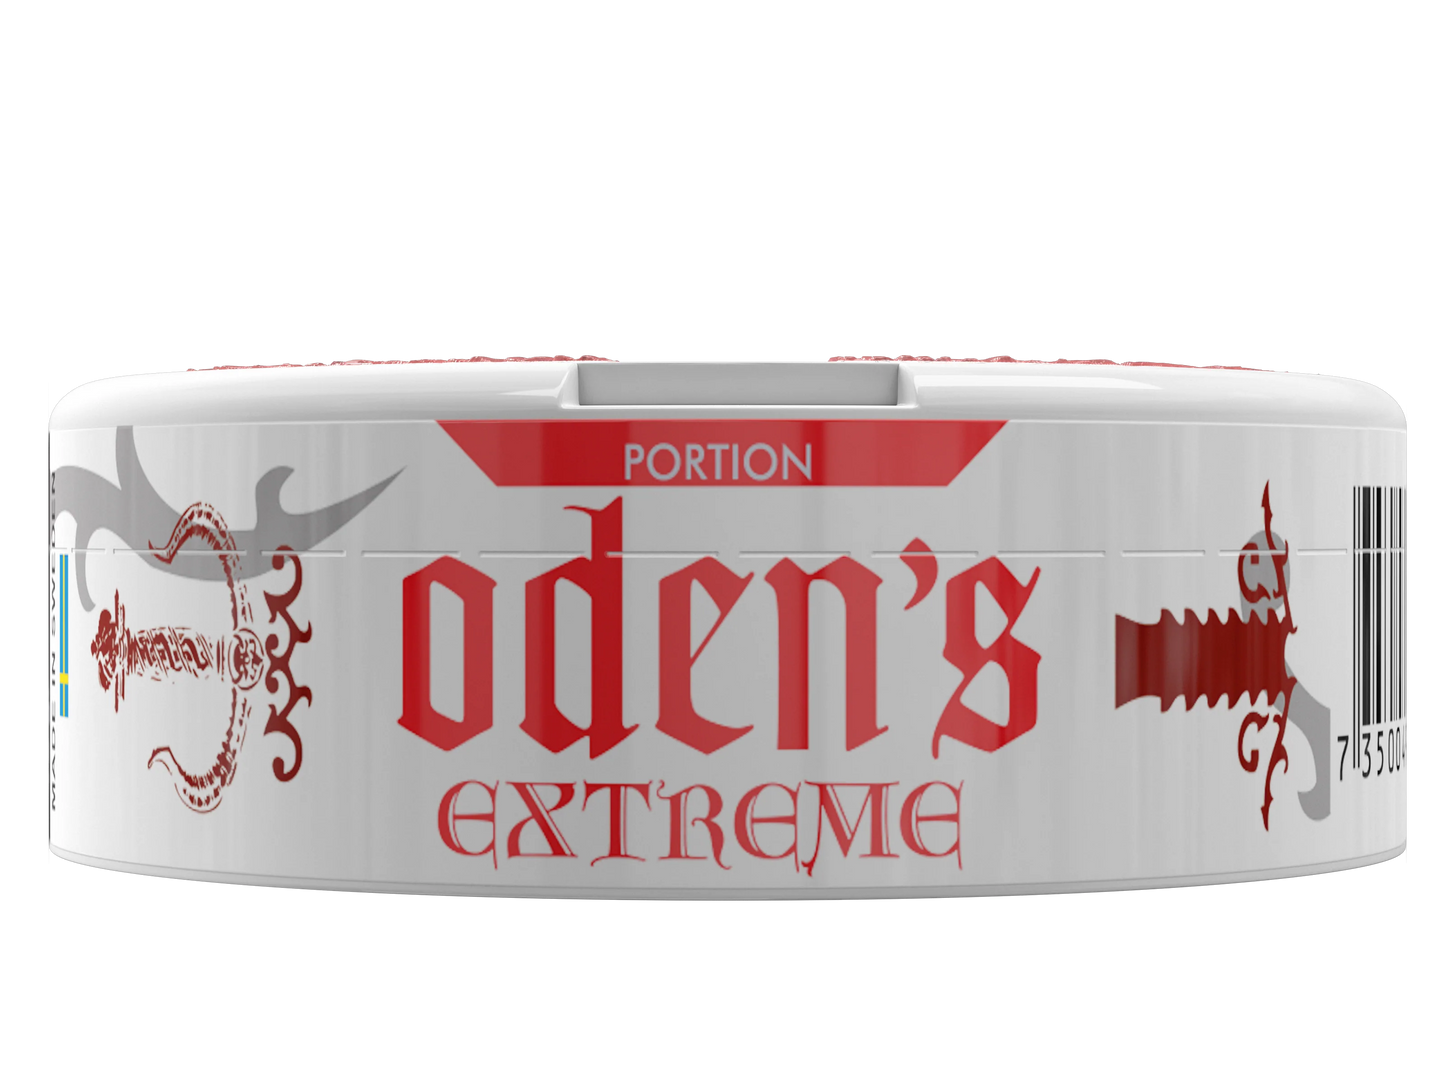 
                  
                    ODEN Cold Extreme White Dry Portion
                  
                